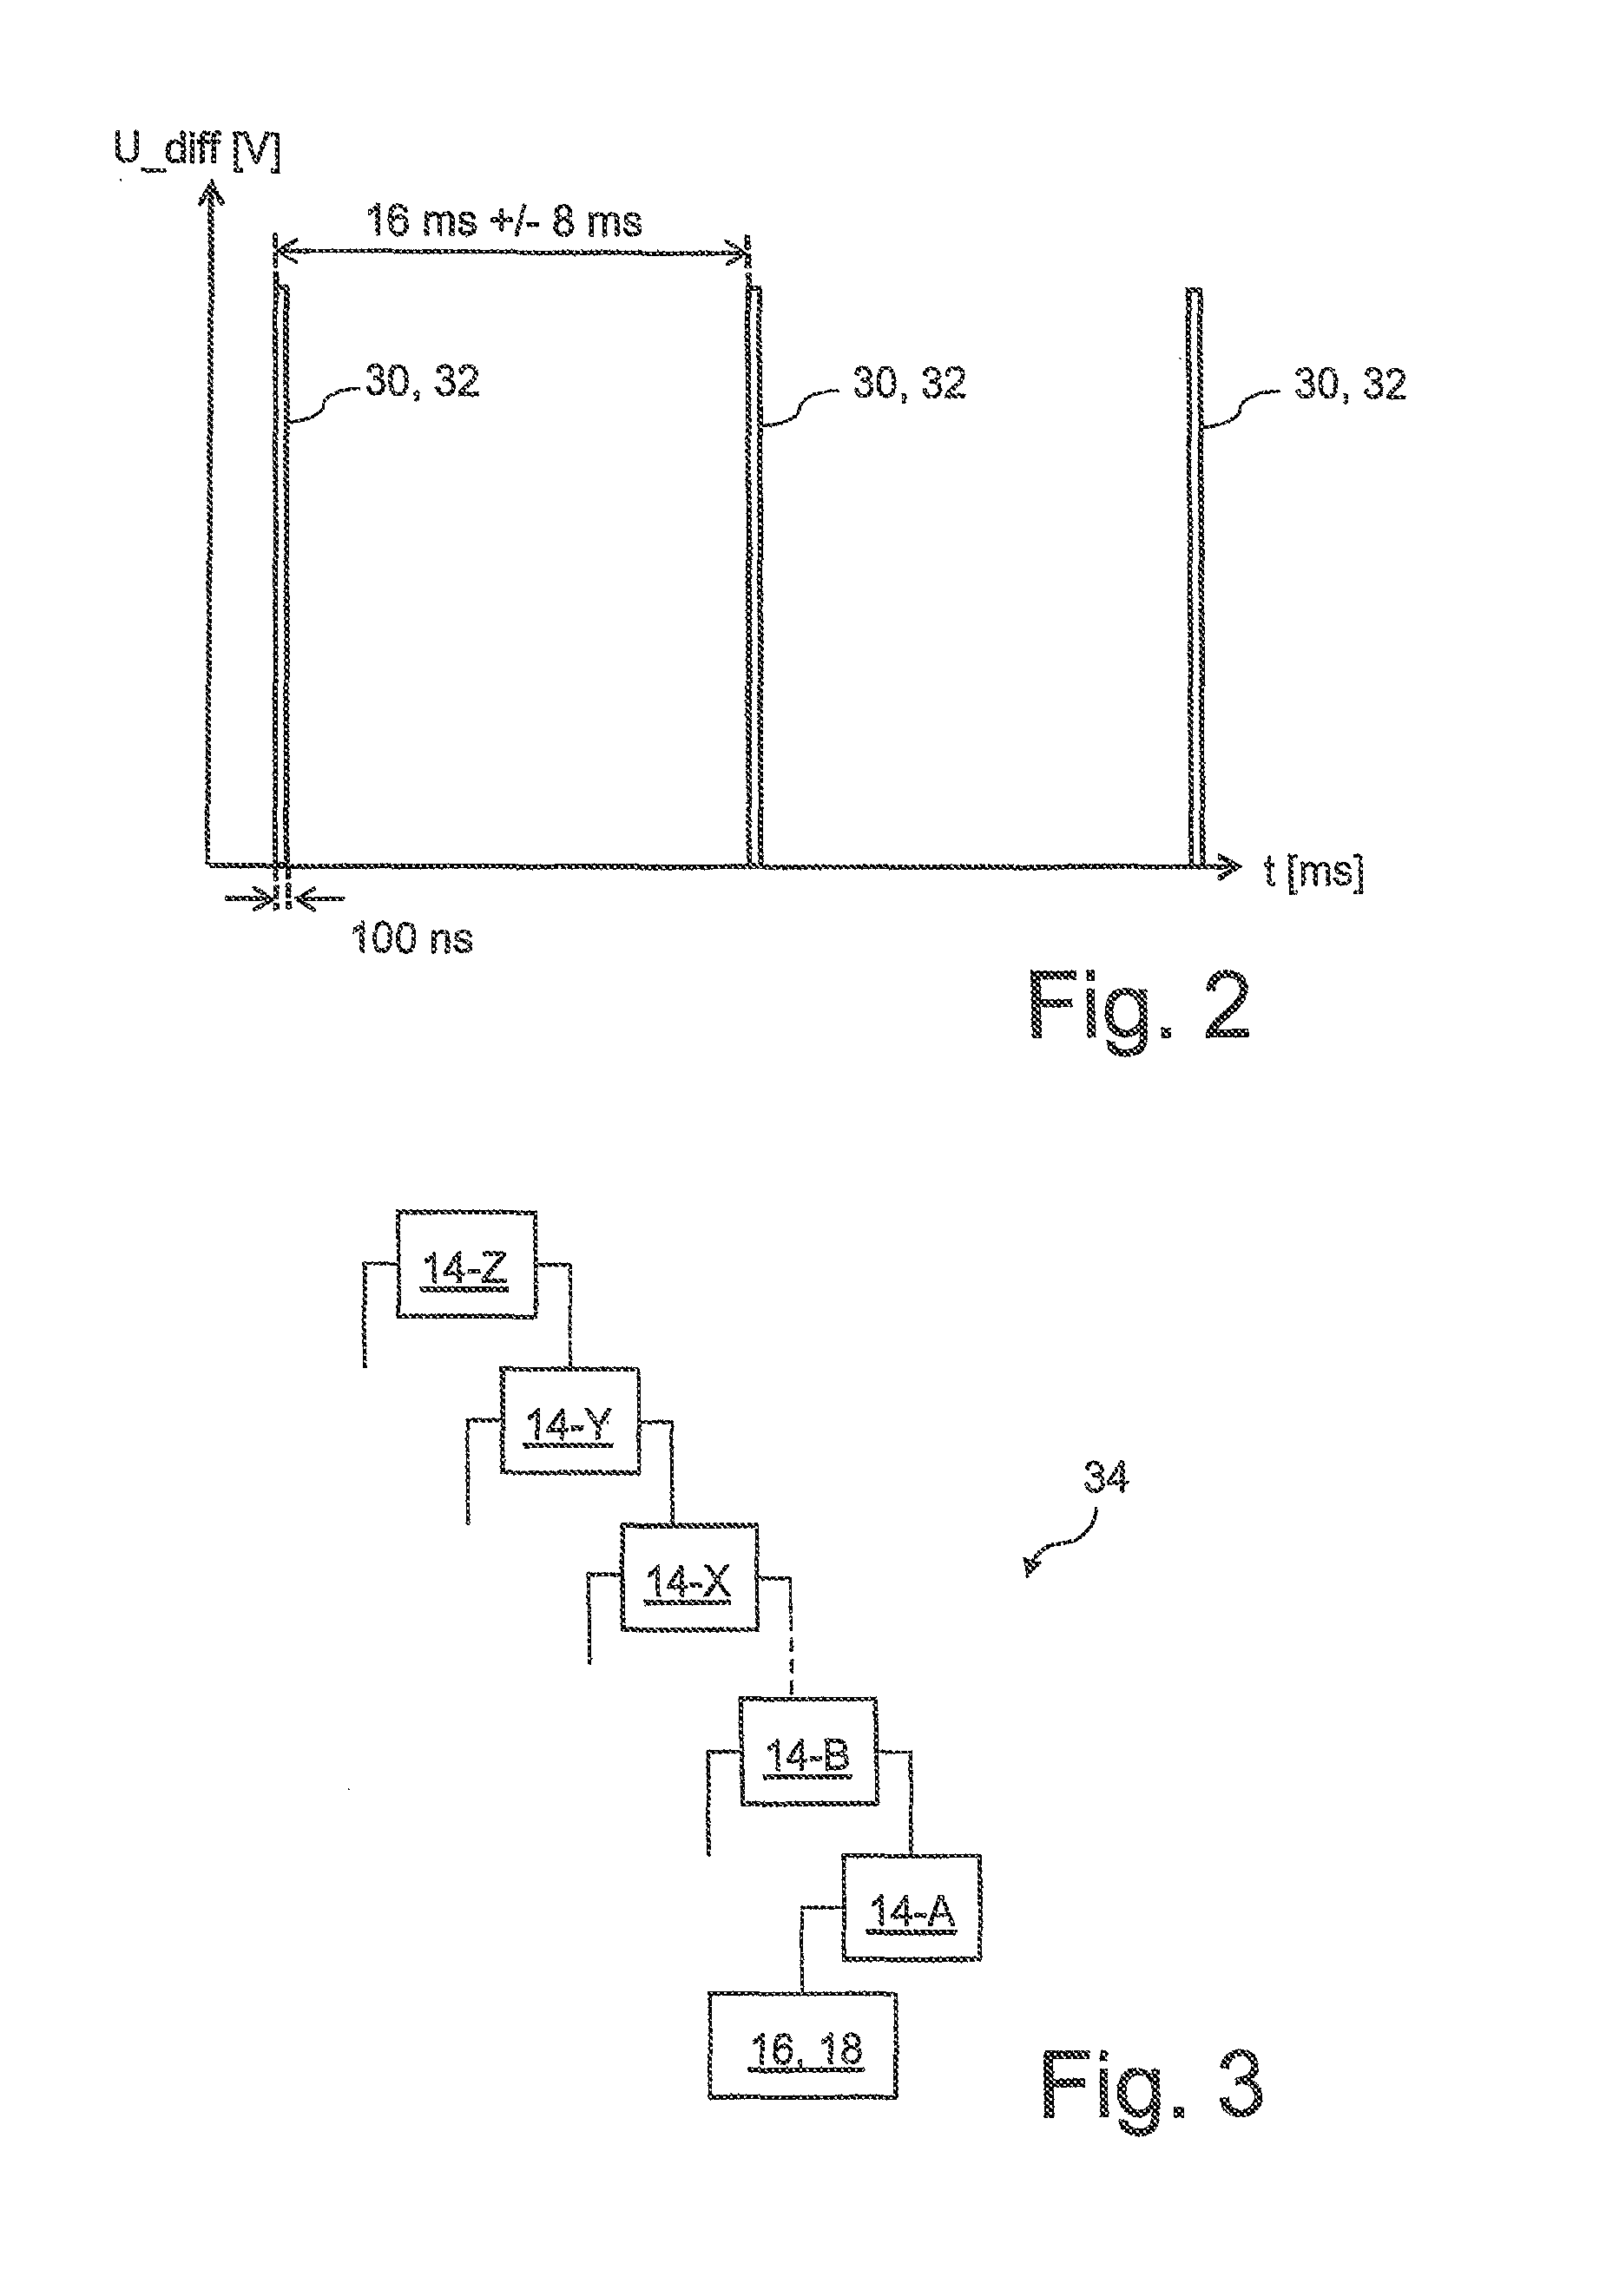 Method for activating a network component of a vehicle network system